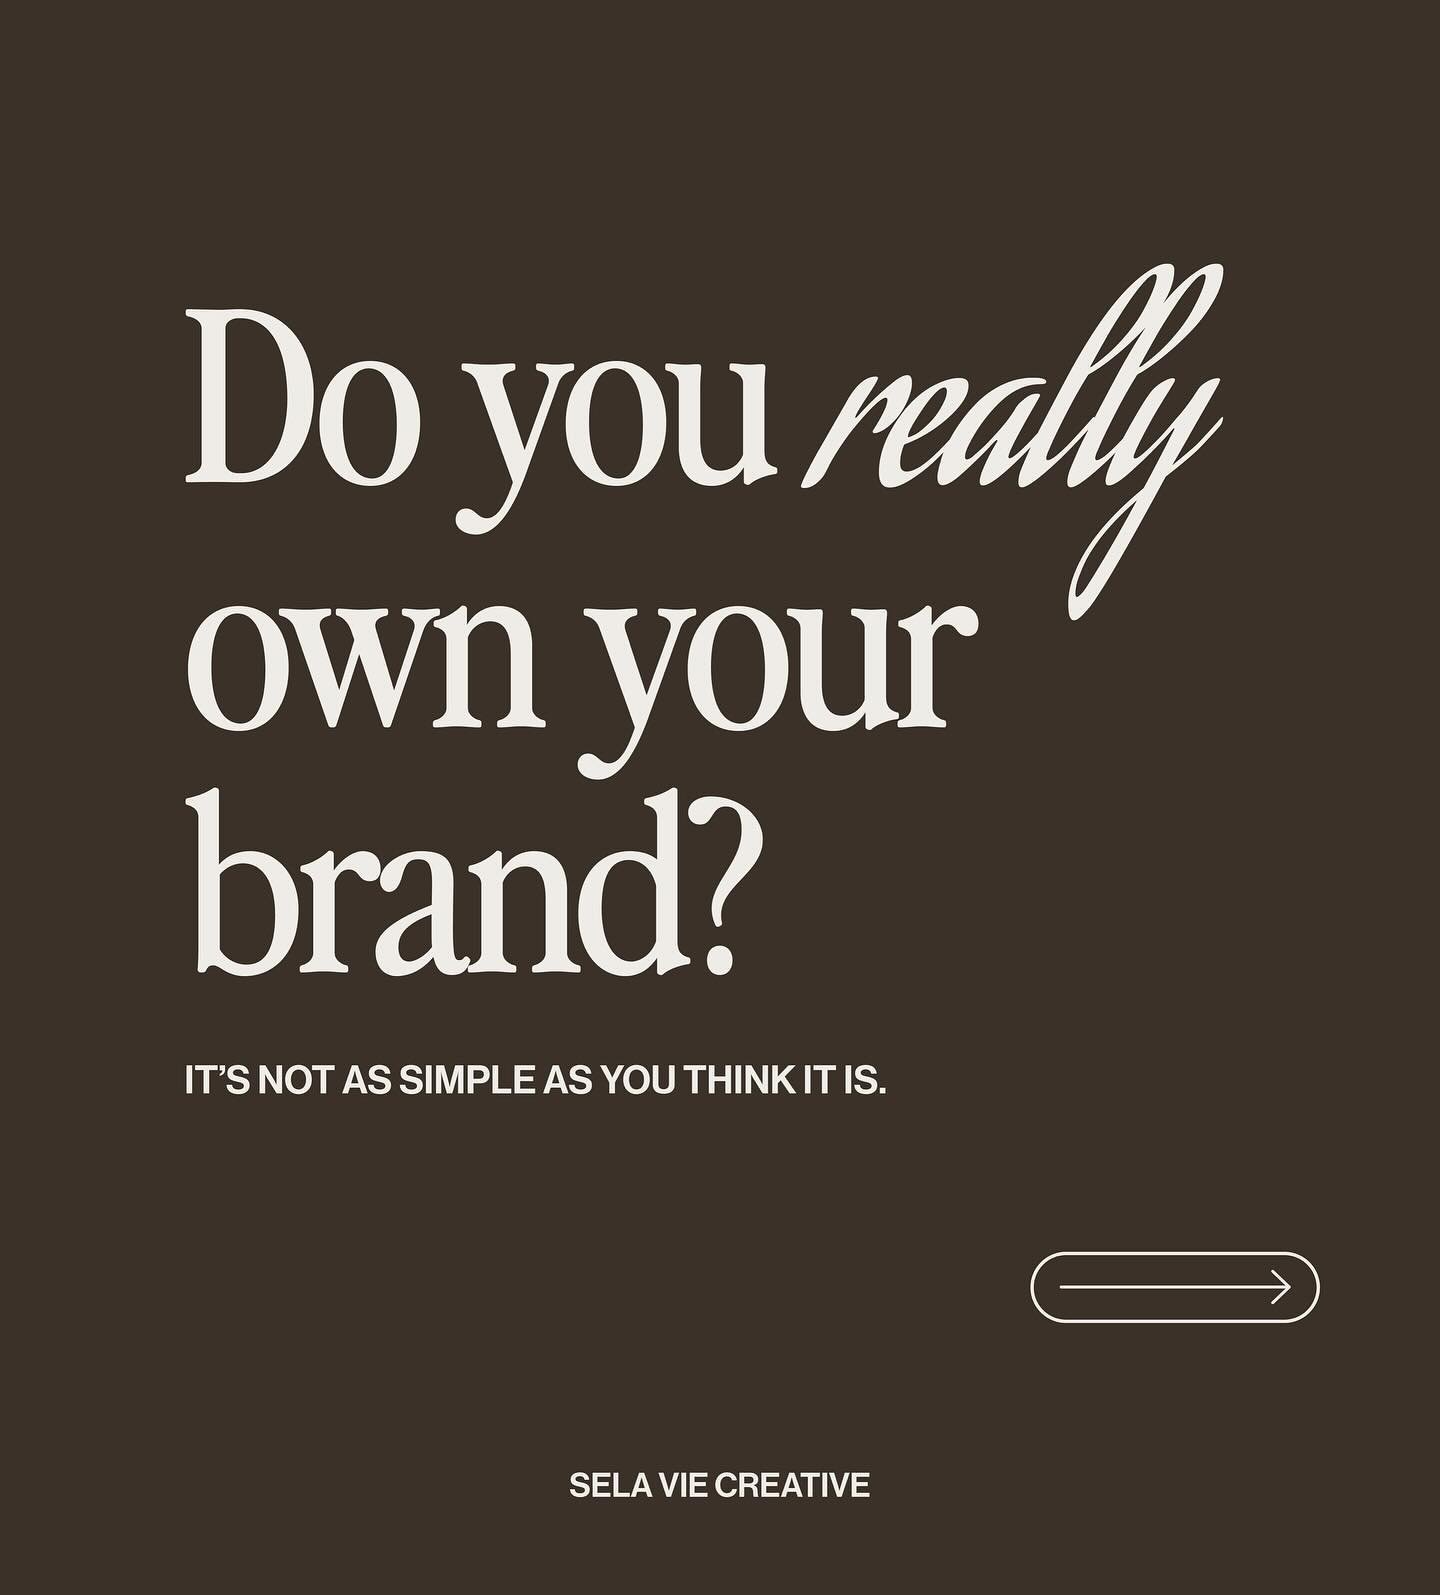 Okay so you started a business, but do you actually OWN your brand? Swipe to learn from our friend @erica.thetrademarklawyer all about trademarks and protecting your brand. This might shock you! 🤯